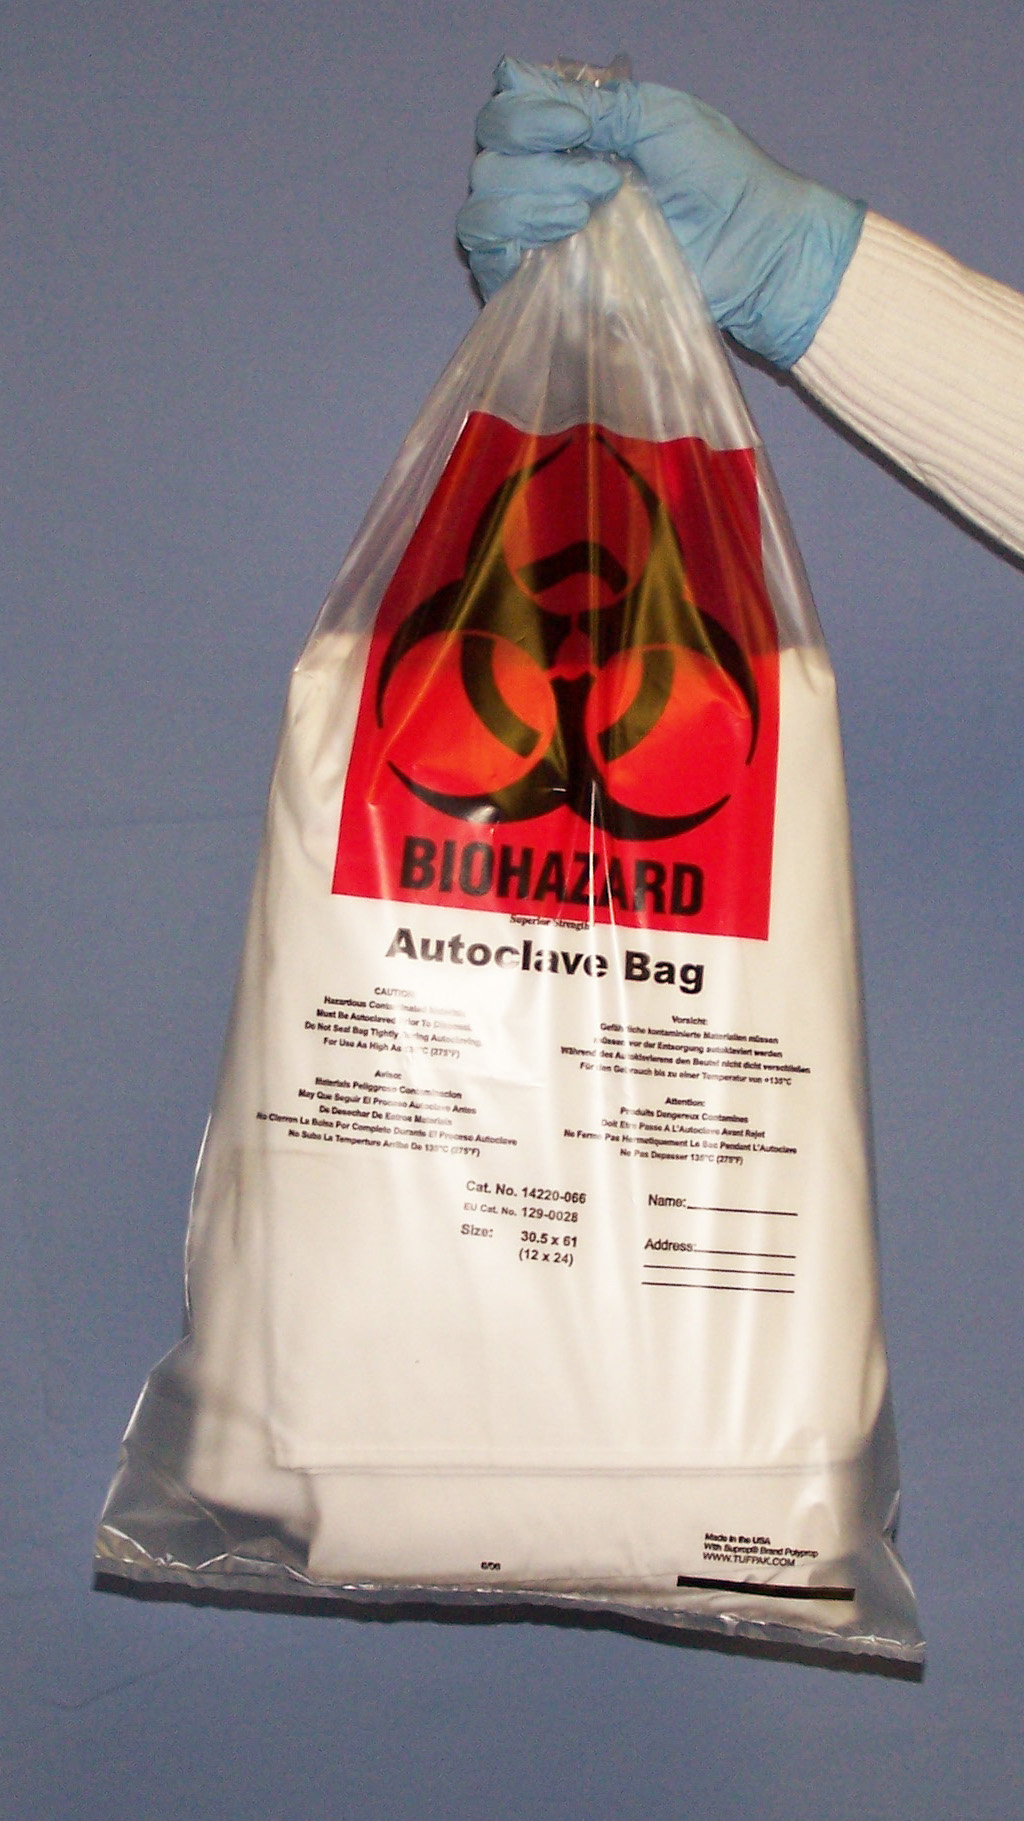 BIOHAZARD AUTOCLAVE BAGS 24X36 IN. CLEAR PP